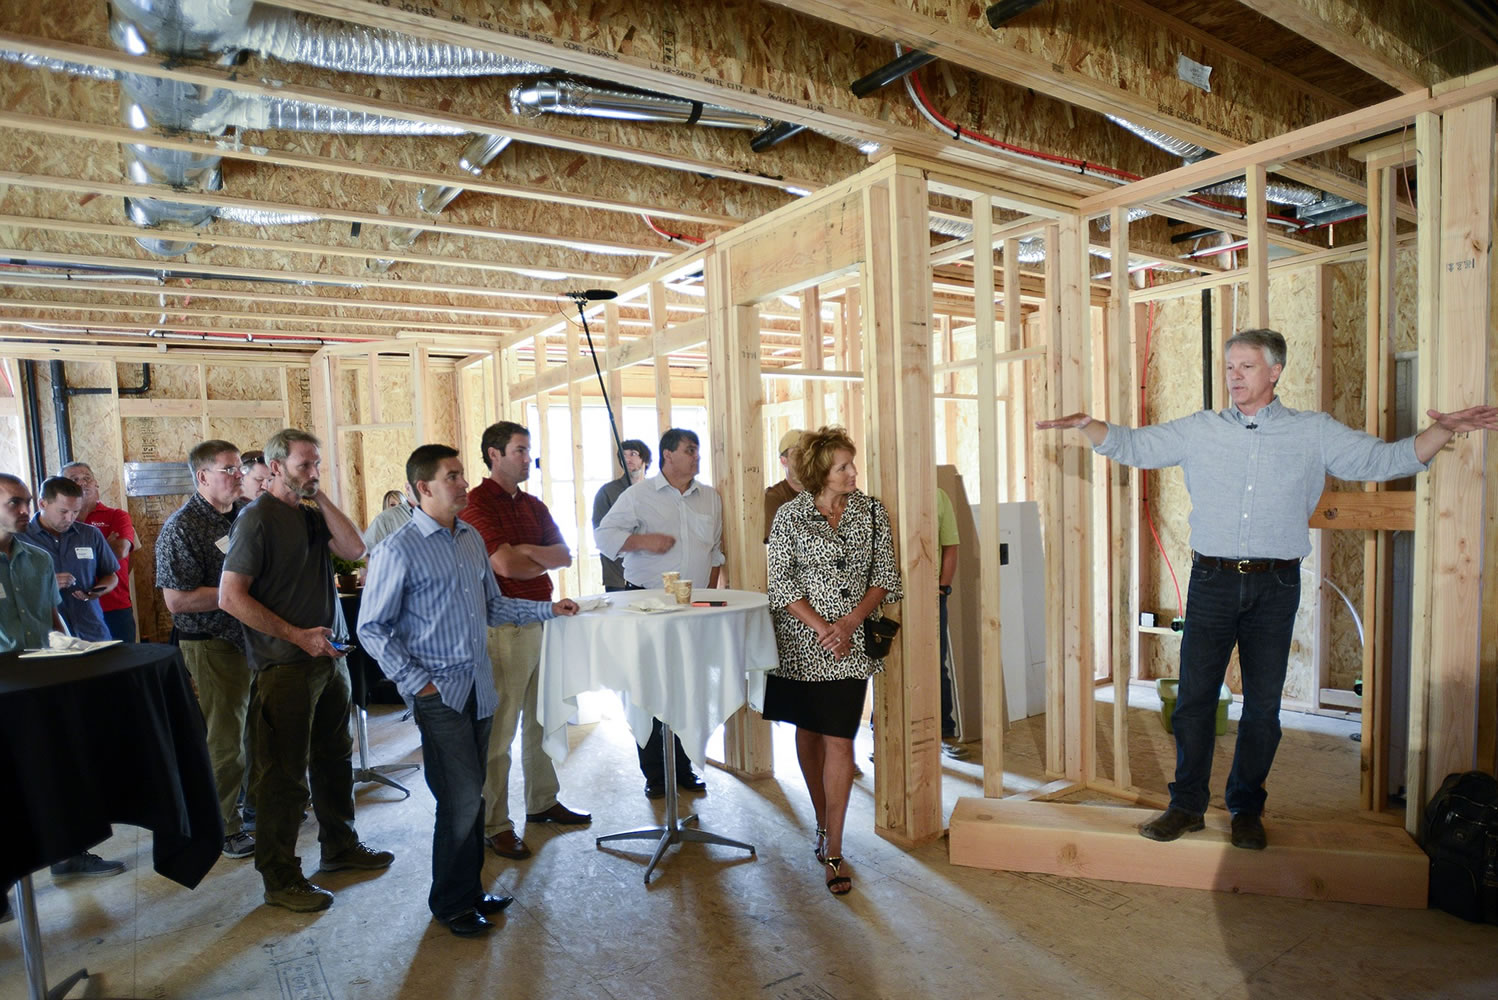 Ariane Kunze/The Columbian
Mark LaLiberte, right, a building science expert, led an informational tour on Thursday in a home under construction by Urban NW Homes in Ridgefield. He explained what builders are doing to make homes more sustainable, energy efficient and durable.